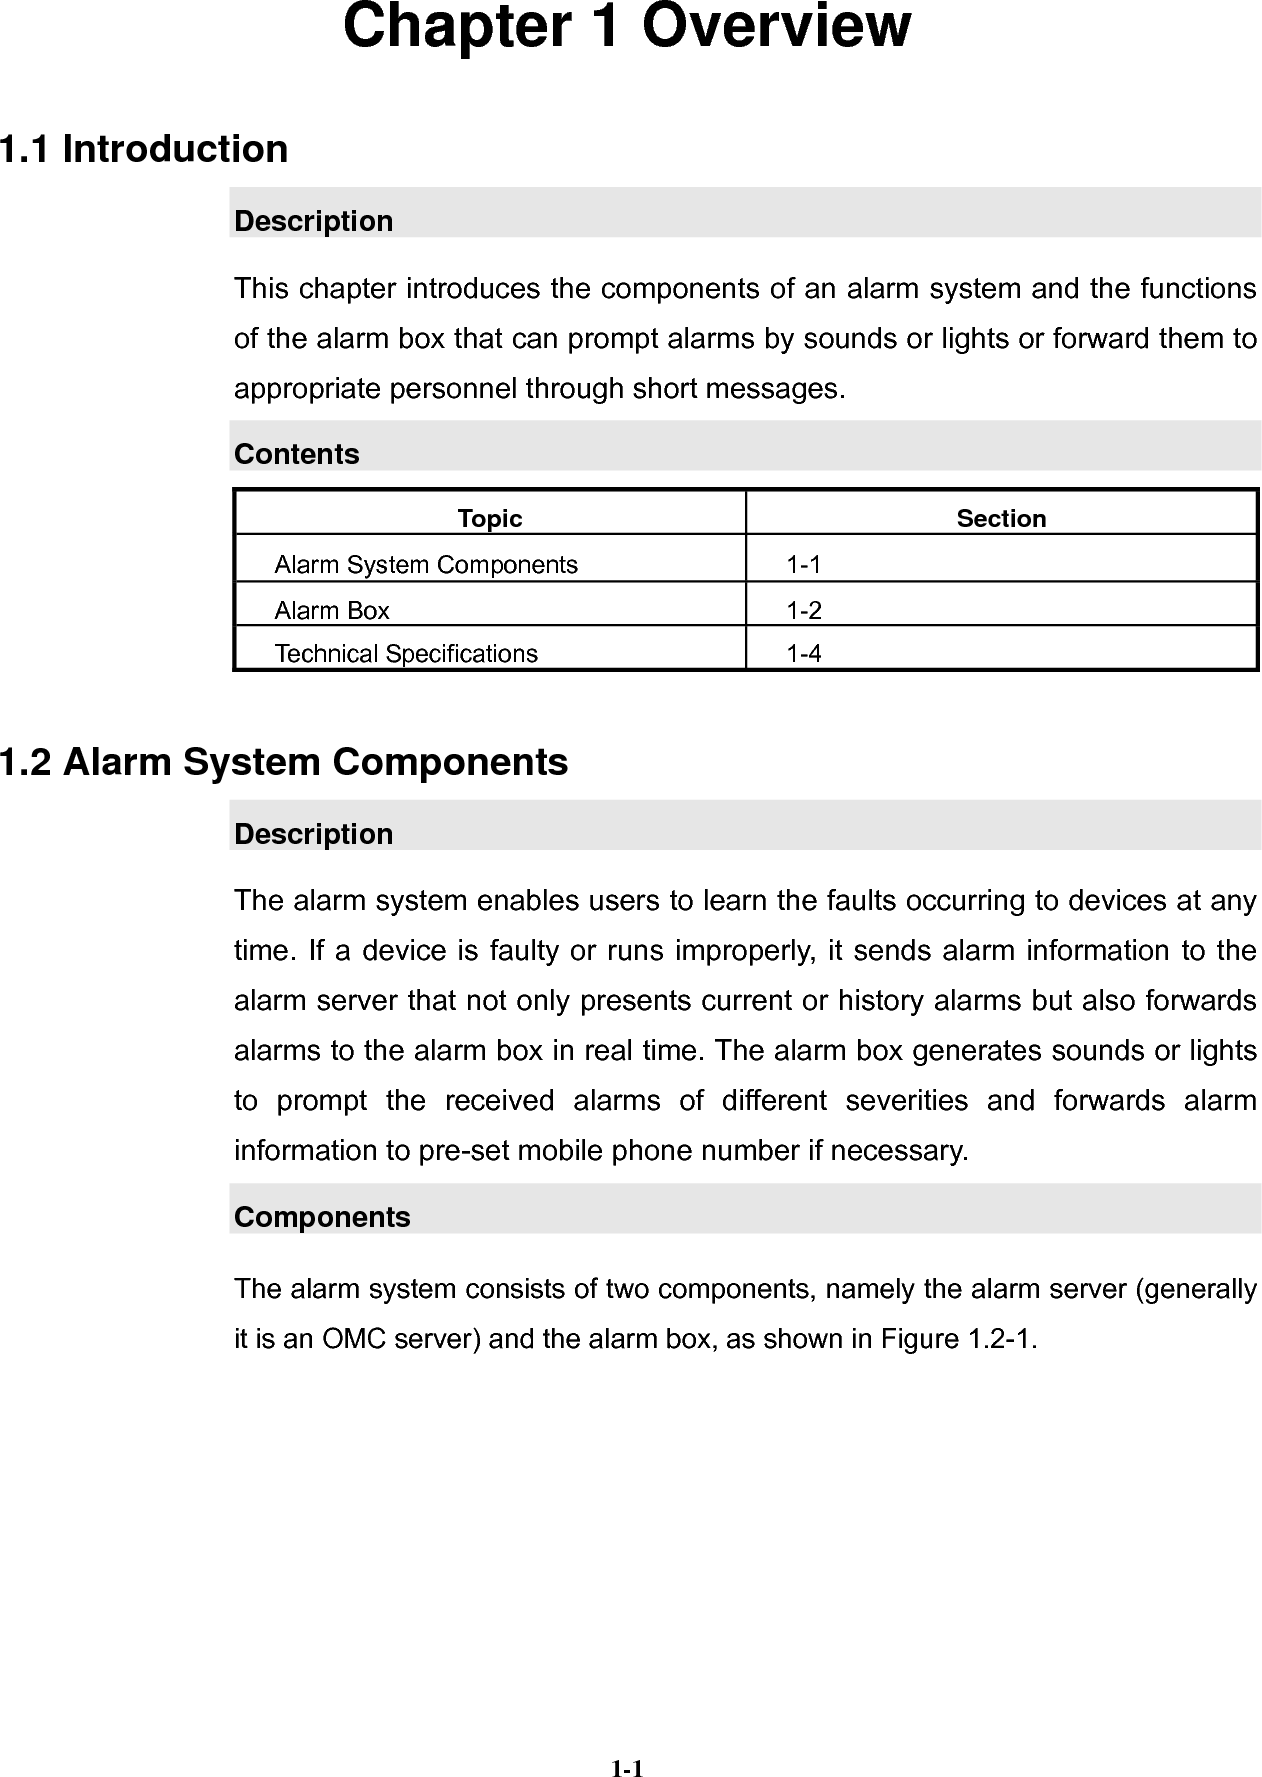   1-1Chapter 1 Overview 1.1 Introduction Description This chapter introduces the components of an alarm system and the functions of the alarm box that can prompt alarms by sounds or lights or forward them to appropriate personnel through short messages. Contents Topic Section Alarm System Components  1-1 Alarm Box    1-2 Technical Specifications  1-4 1.2 Alarm System Components Description The alarm system enables users to learn the faults occurring to devices at any time. If a device is faulty or runs improperly, it sends alarm information to the alarm server that not only presents current or history alarms but also forwards alarms to the alarm box in real time. The alarm box generates sounds or lights to prompt the received alarms of different severities and forwards alarm information to pre-set mobile phone number if necessary. Components The alarm system consists of two components, namely the alarm server (generally it is an OMC server) and the alarm box, as shown in Figure 1.2-1. 